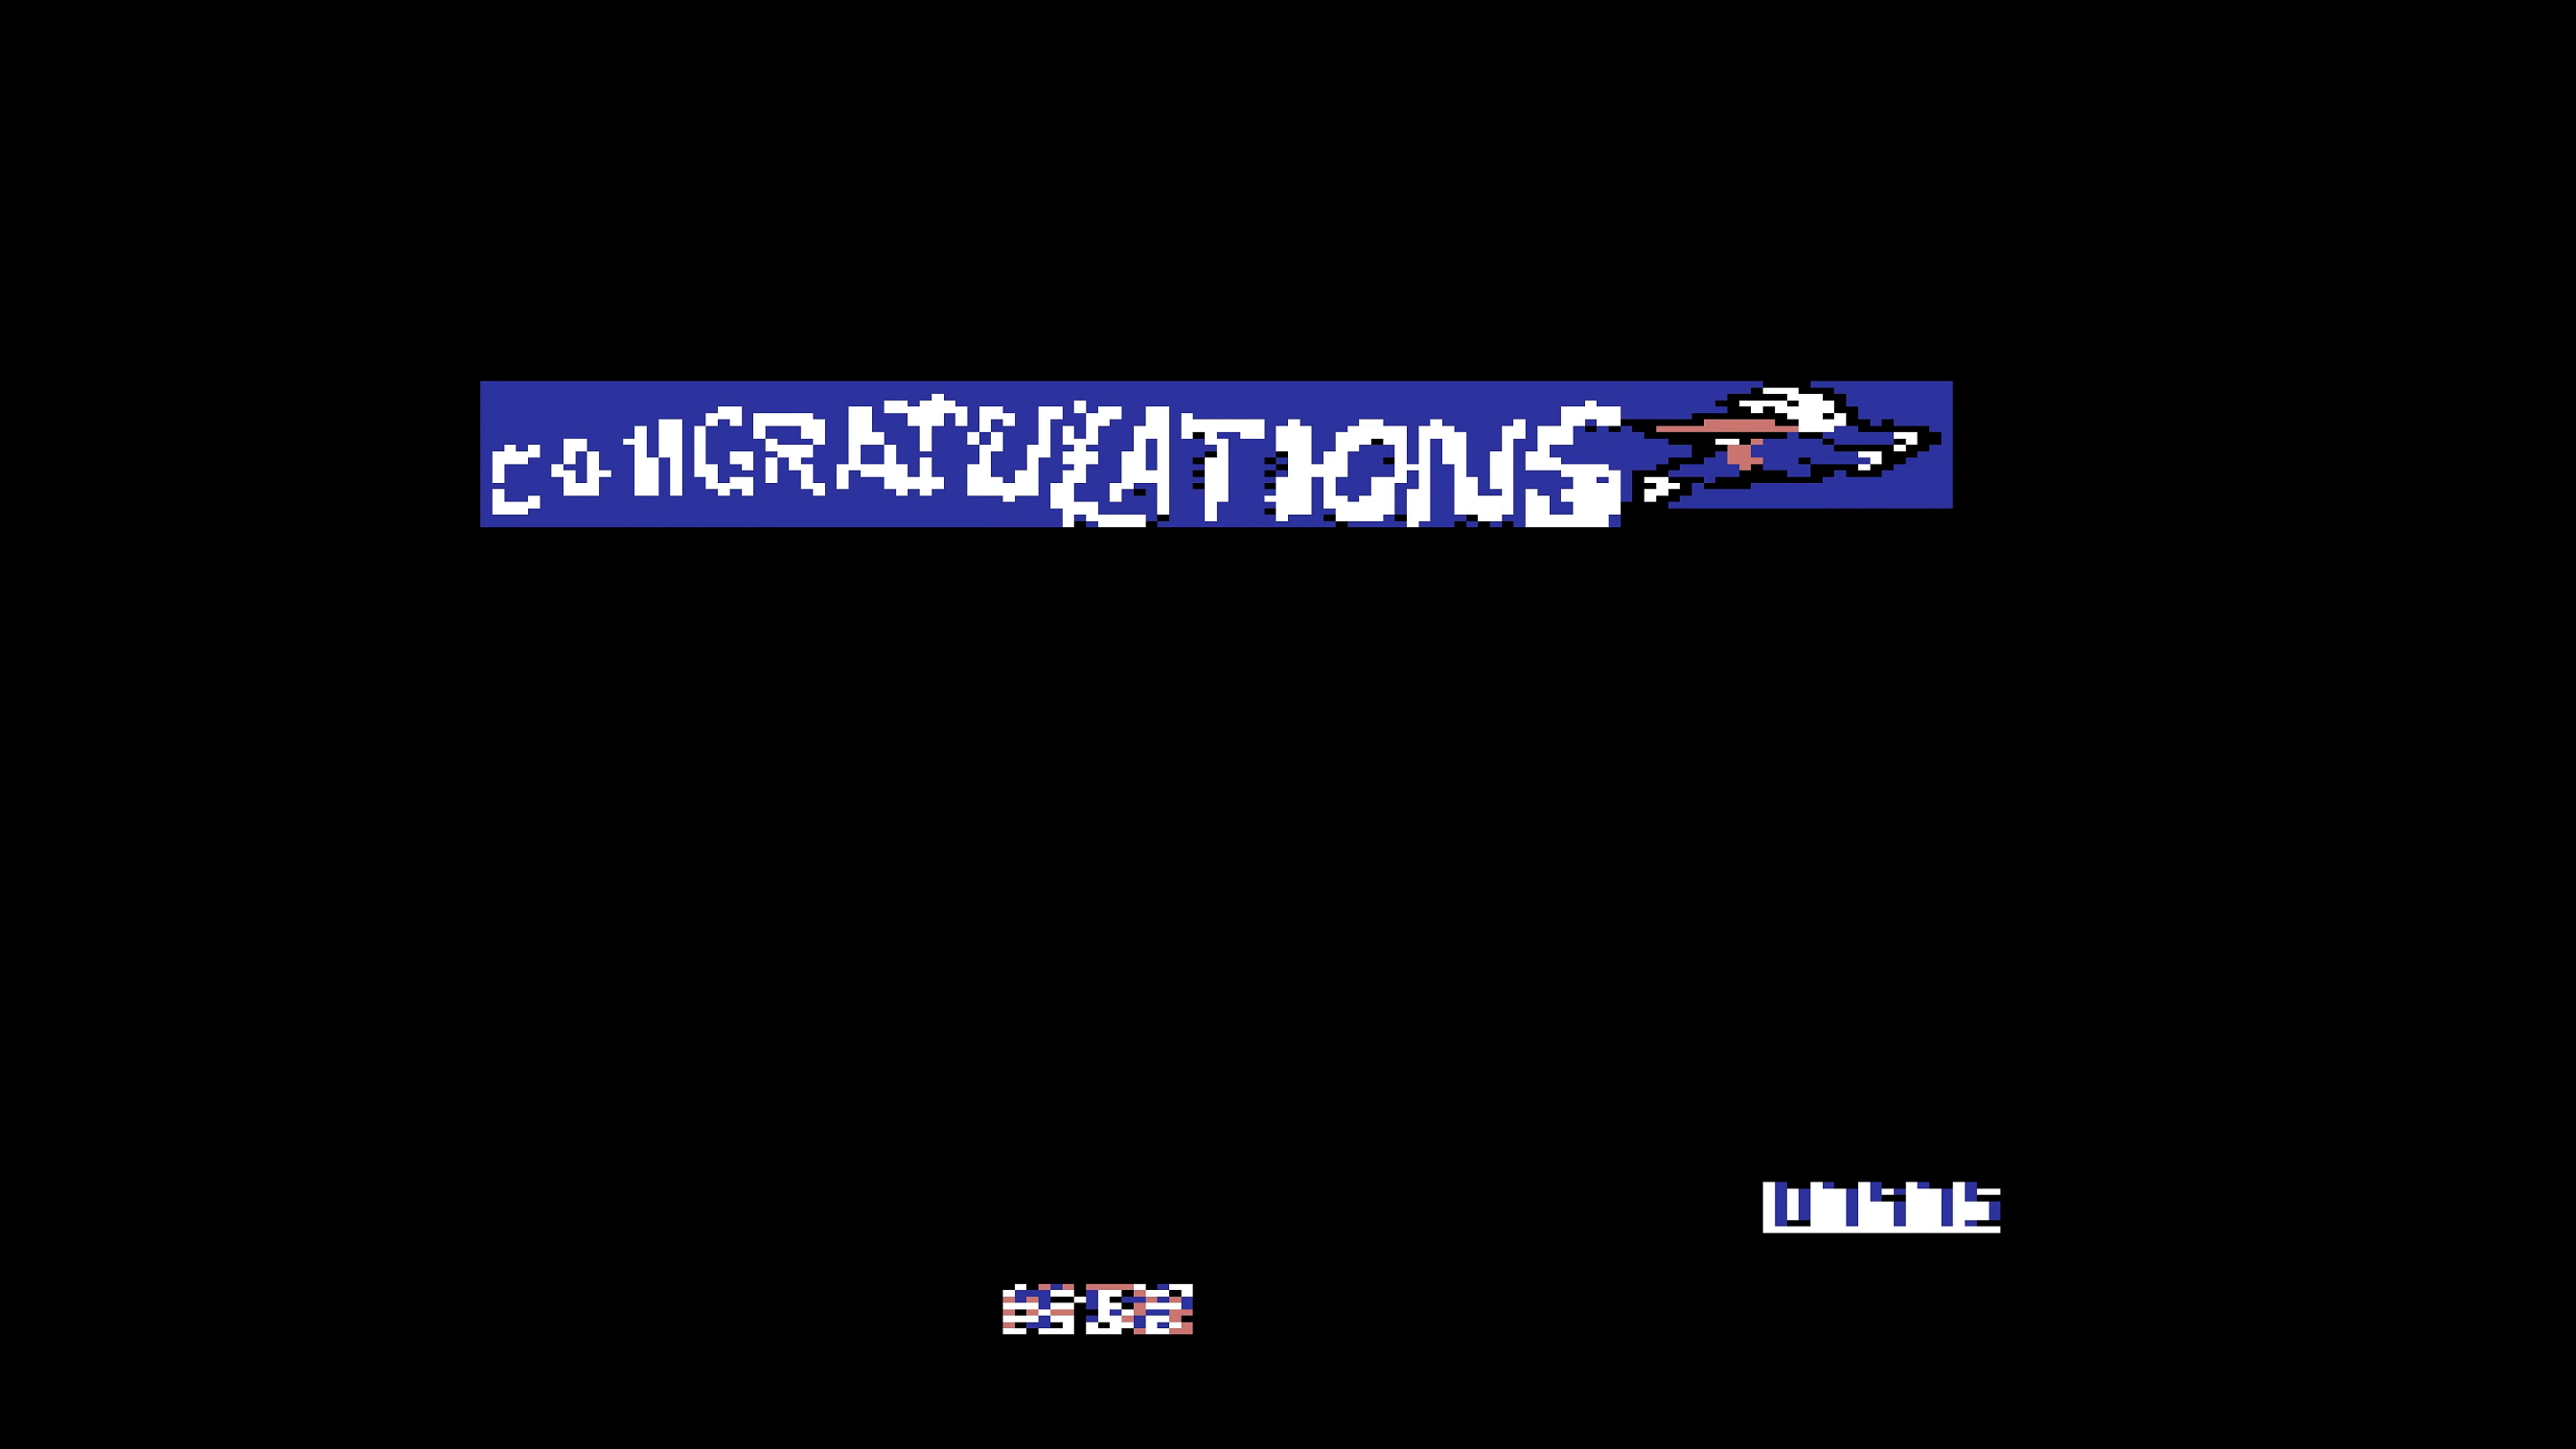 ransom: Super Bunny (Commodore 64 Emulated) 7,975 points on 2022-11-19 23:09:18